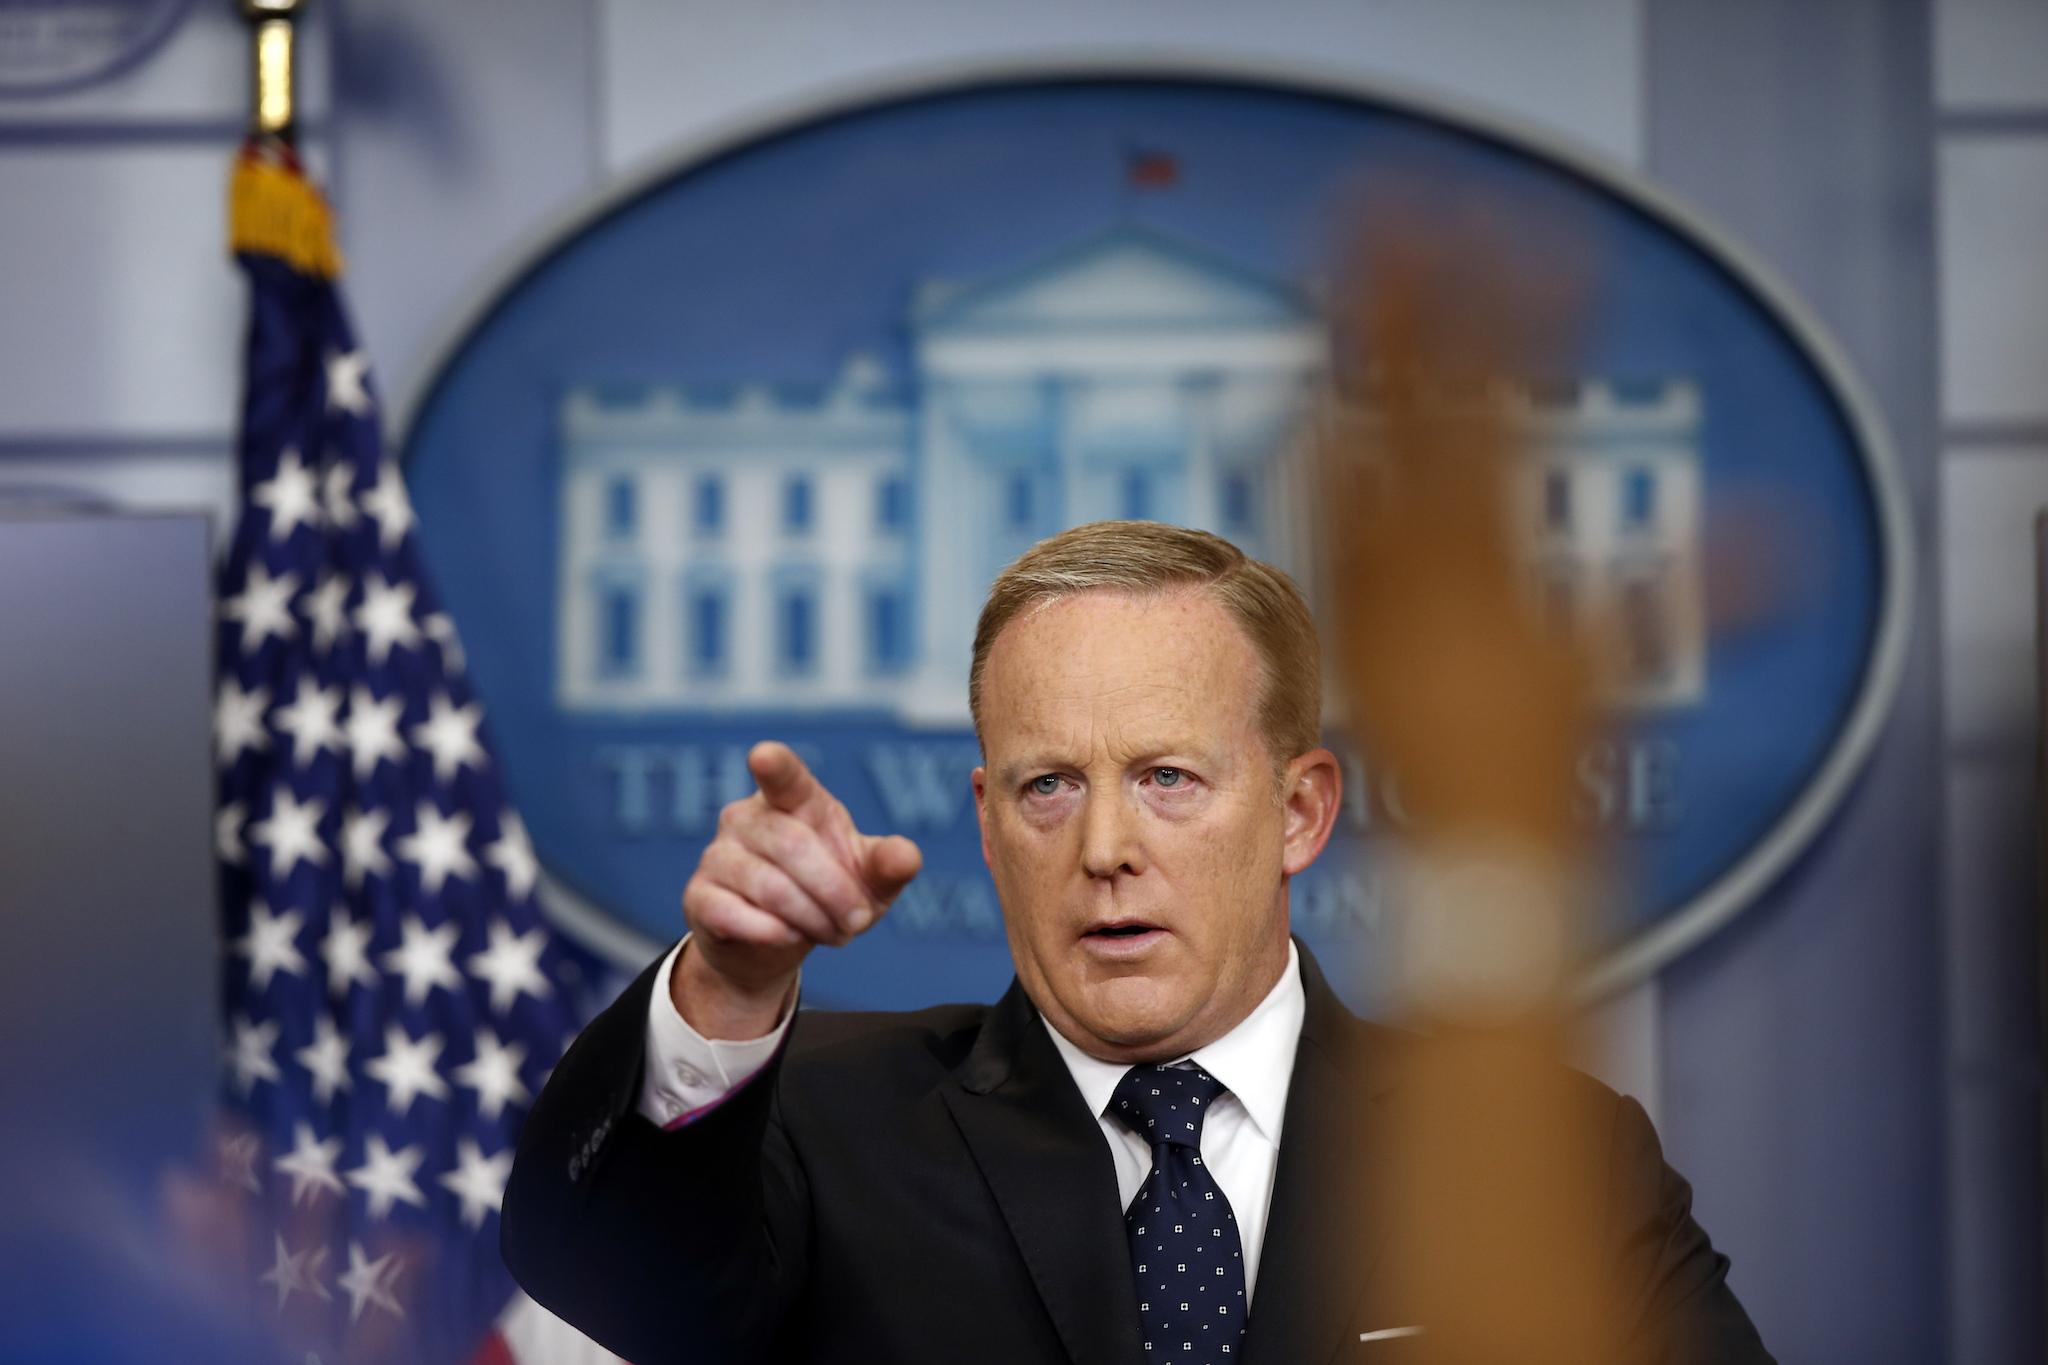 Spicer has been pulling press access to the White House back